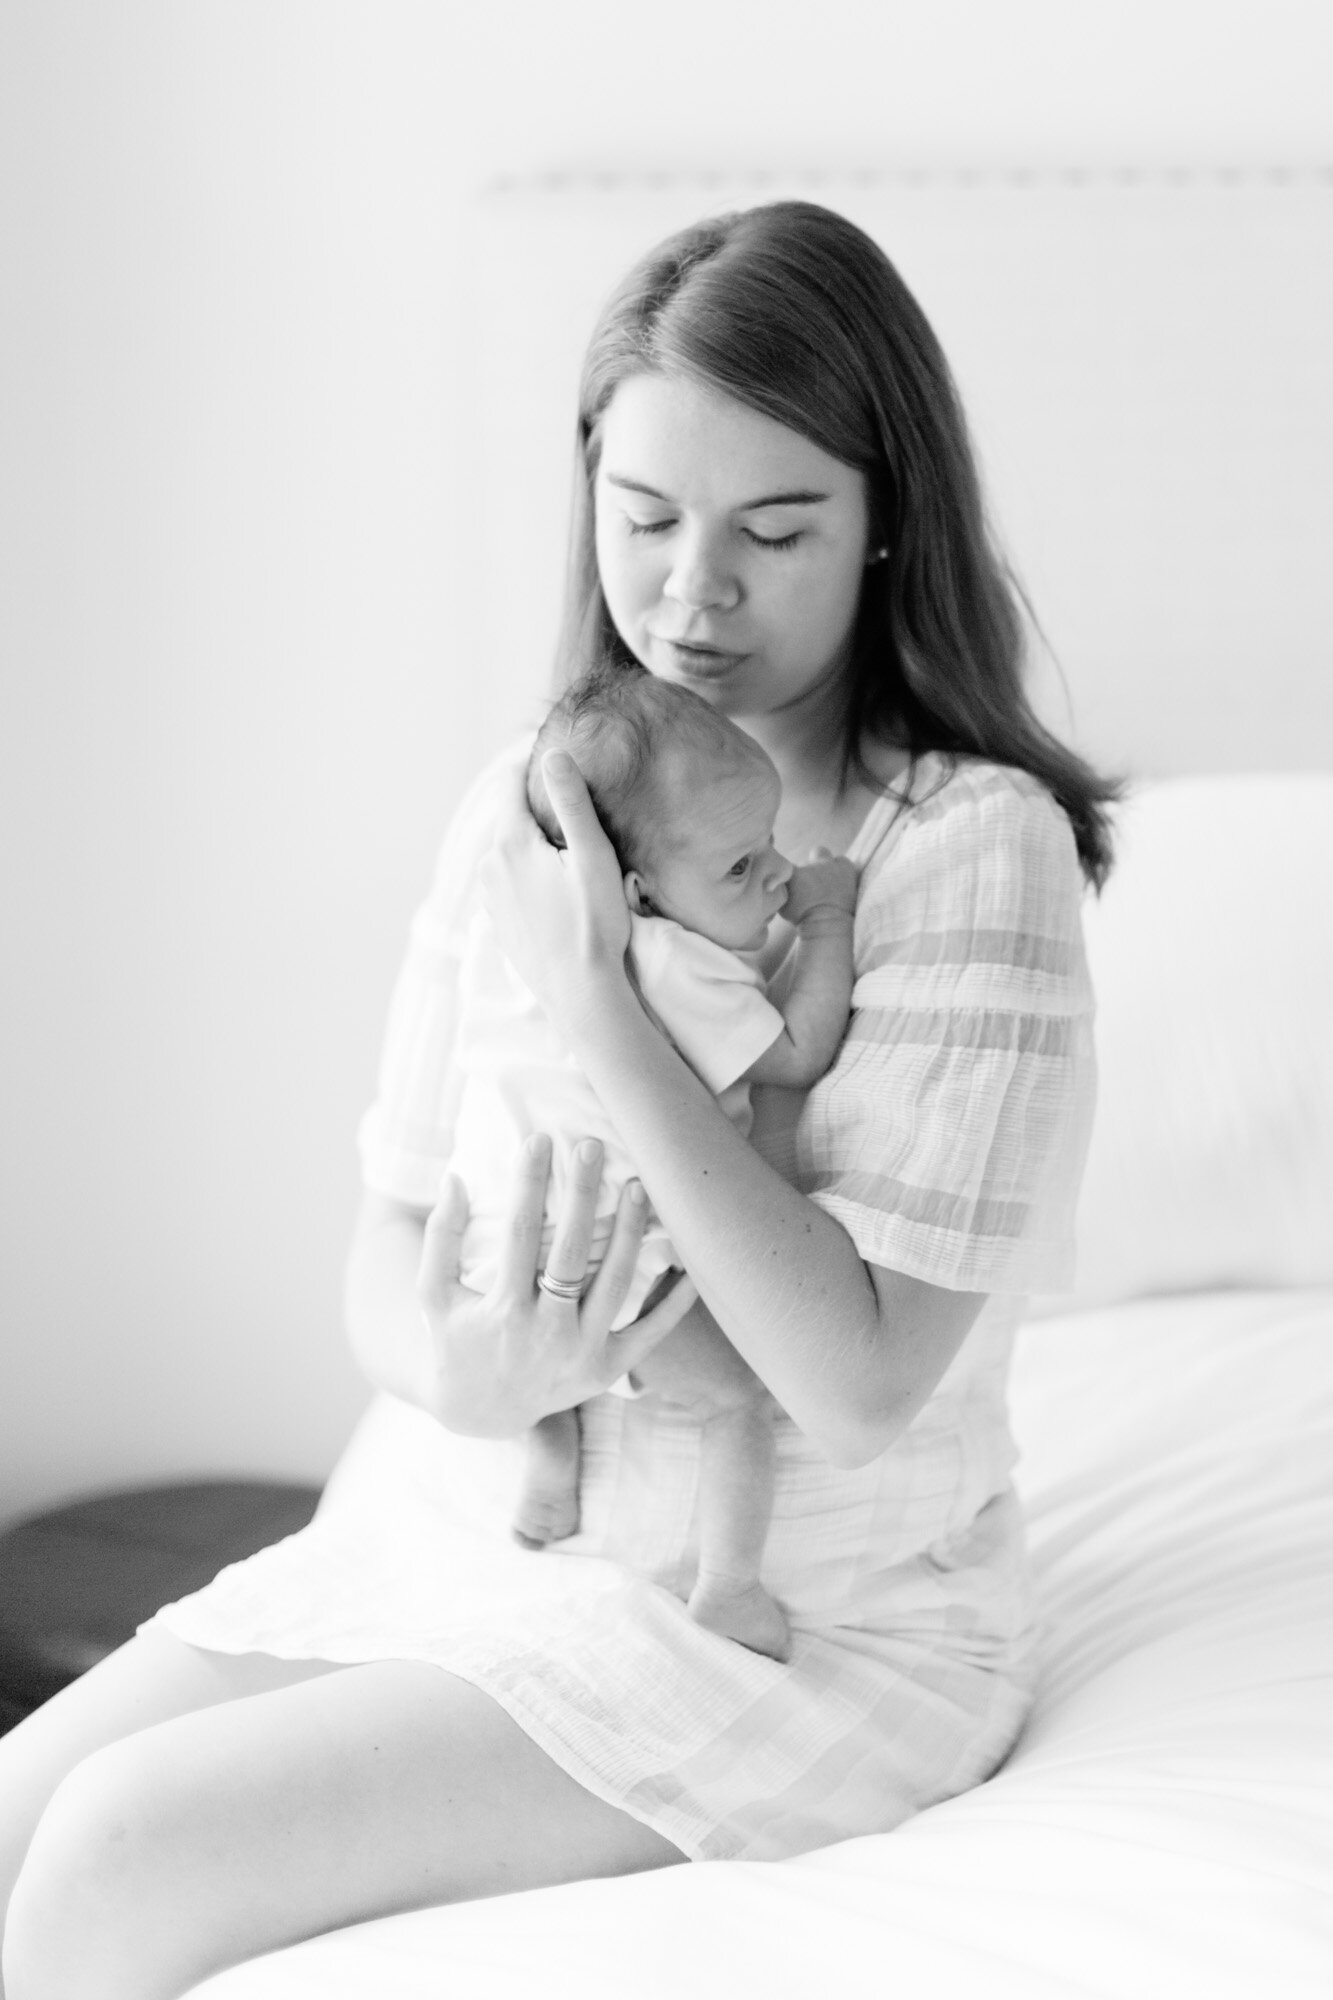 New York newborn Photographer, Jacqueline Clair Photography features their latest newborn session in Hoboken